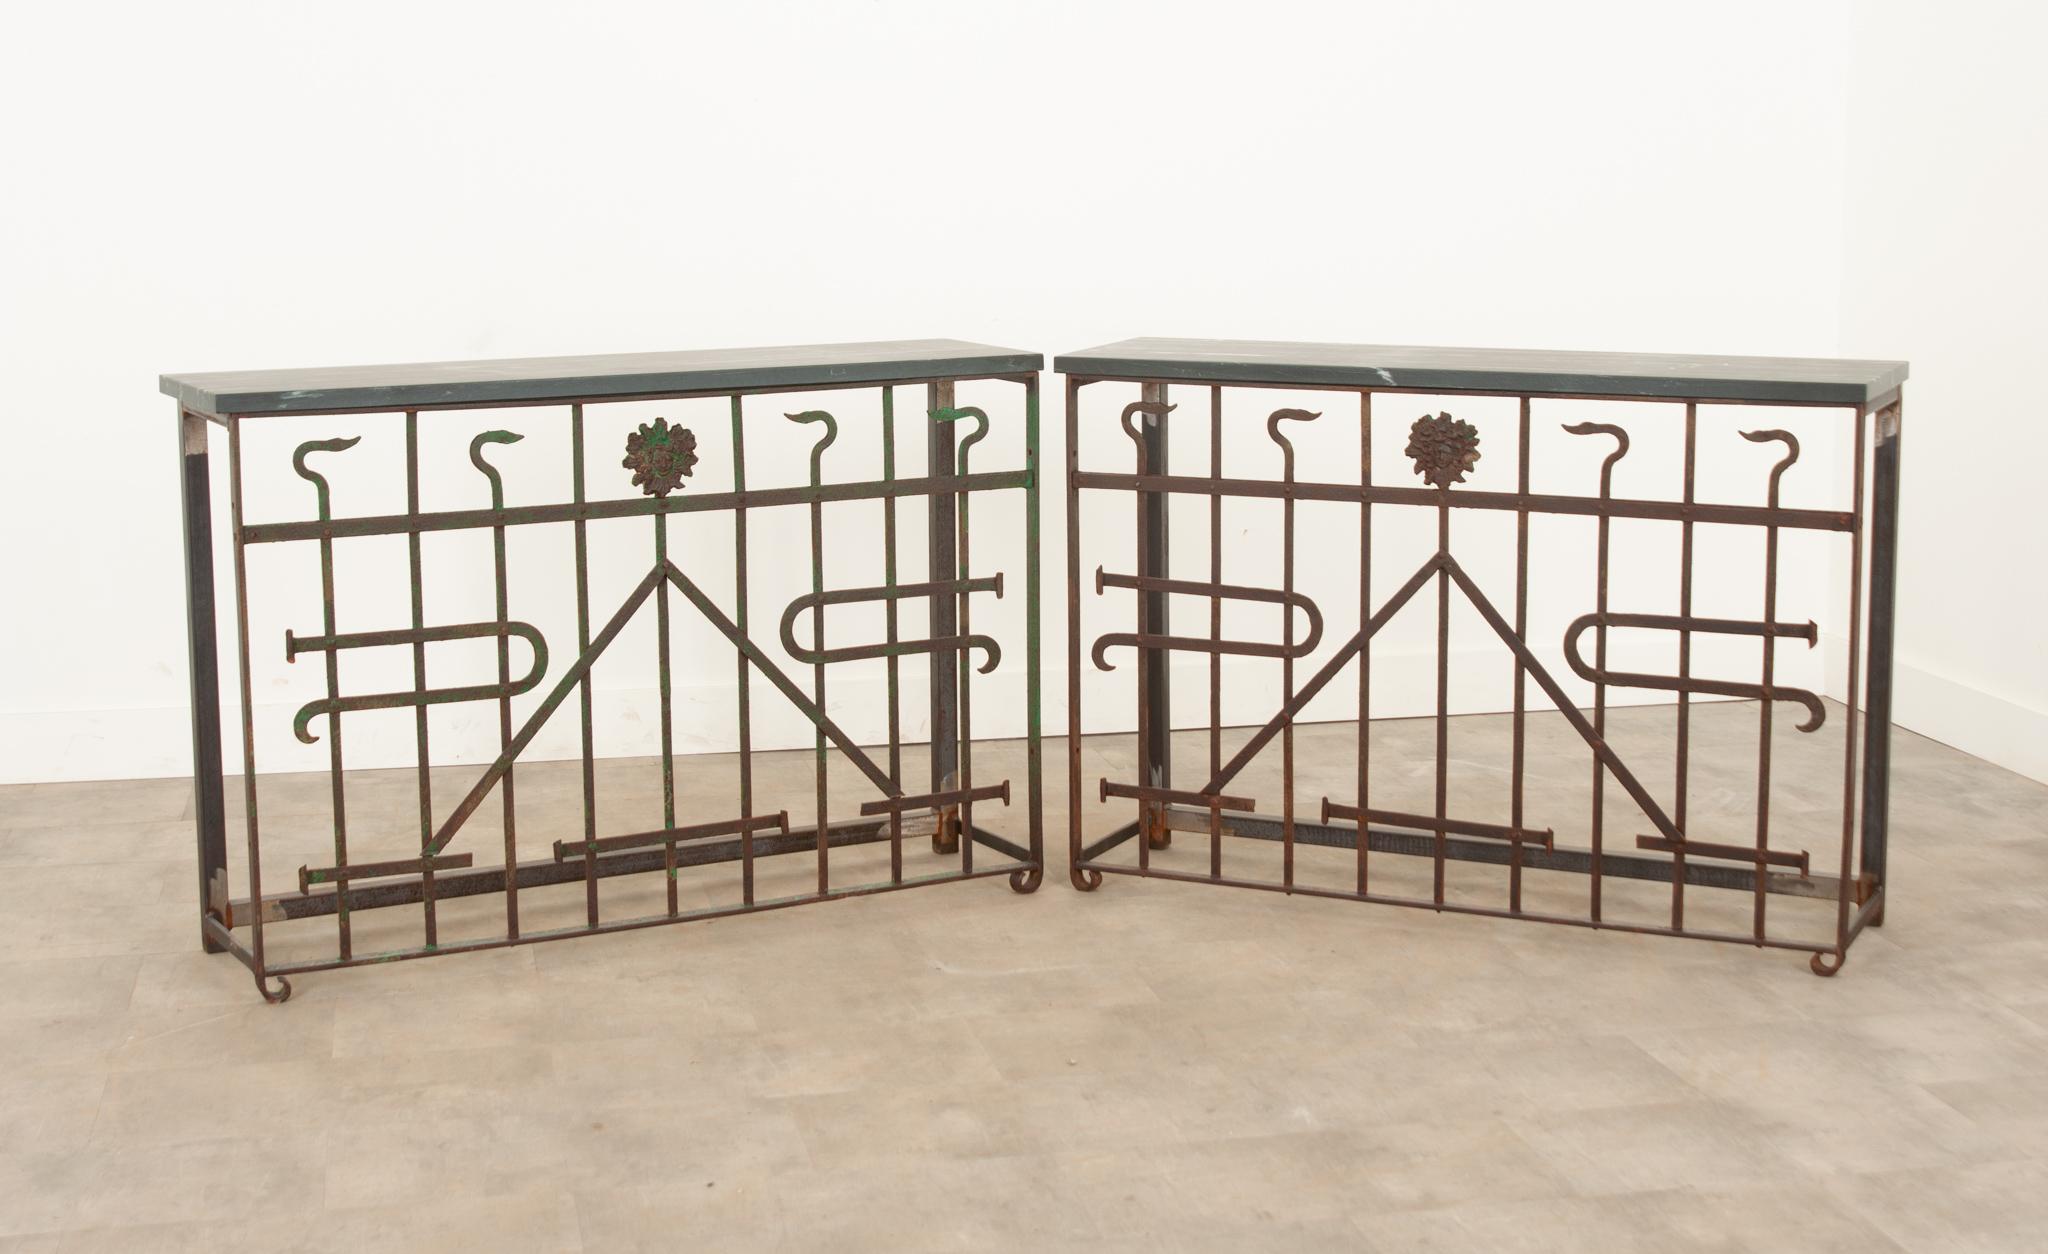 This newly composed pair of  consoles were recently crafted from 19th Century iron panels from Europe and topped with a fabulous piece of charcoal stone with white veining. The iron was painted a vibrant green once and has gained a perfect patina.